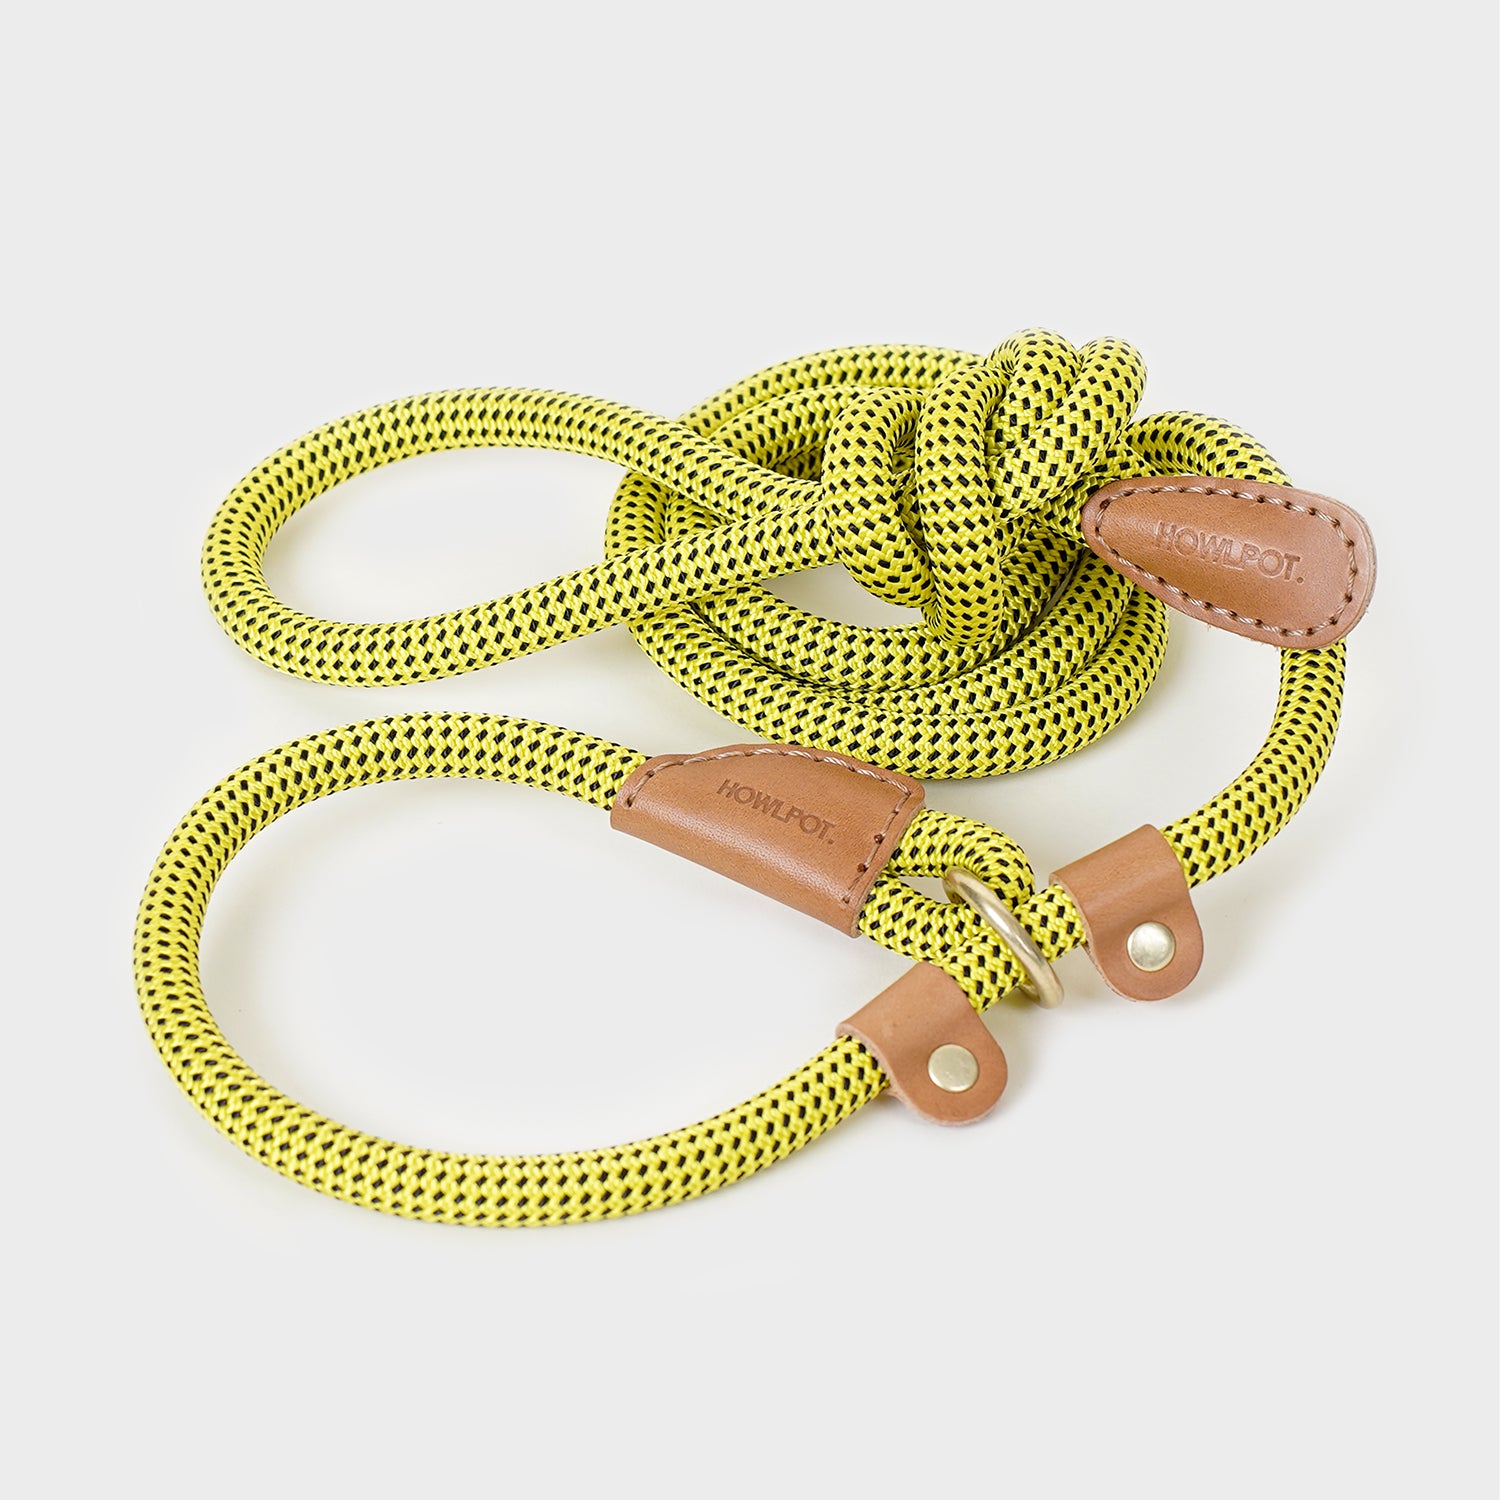 We are Tight All-in-One Leash (Black Lemon) - Howlpot USA